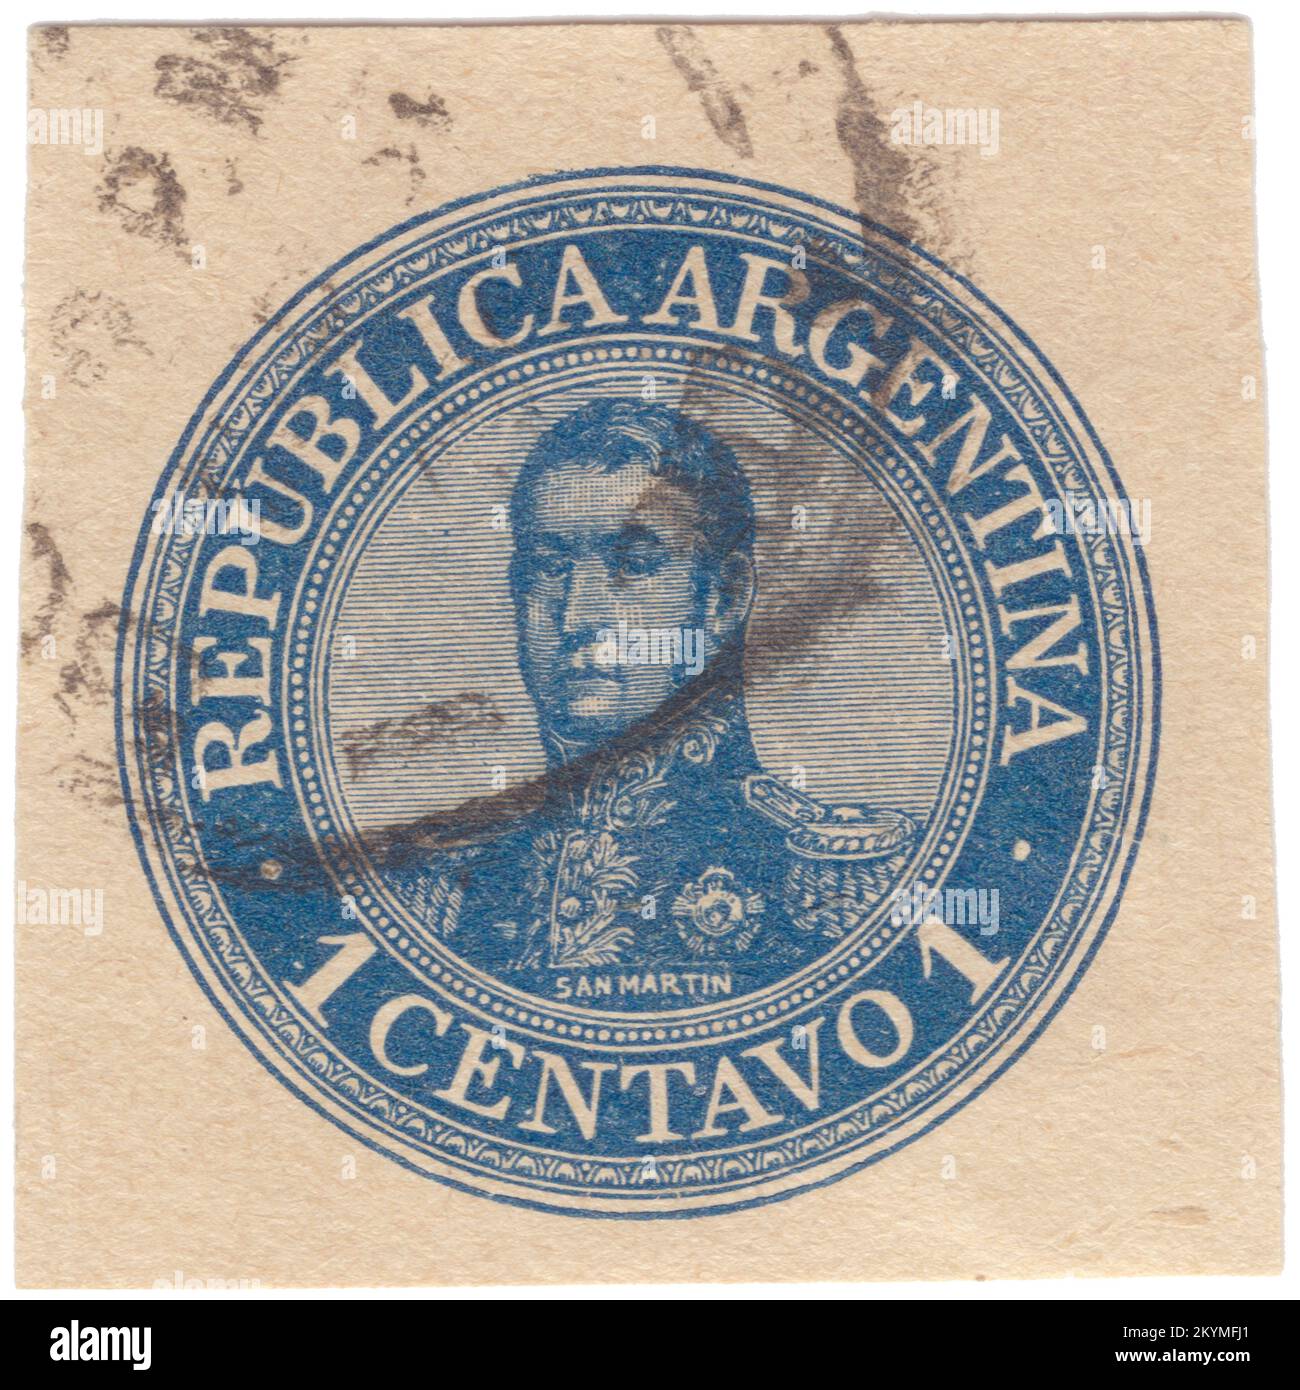 ARGENTINA - 1908: An fragment of original envelope with pre-printed 1 centavo dark blue postage stamp depicting portrait of José de San Martín (Jose Francisco de San Martín y Matorras), known as the Liberator of Argentina, Chile and Peru. Argentine general and the primary leader of the southern and central parts of South America's successful struggle for independence from the Spanish Empire who served as the Protector of Peru. Born in Yapeyú, Corrientes, in modern-day Argentina, he left the Viceroyalty of the Río de la Plata at the early age of seven to study in Málaga, Spain Stock Photo